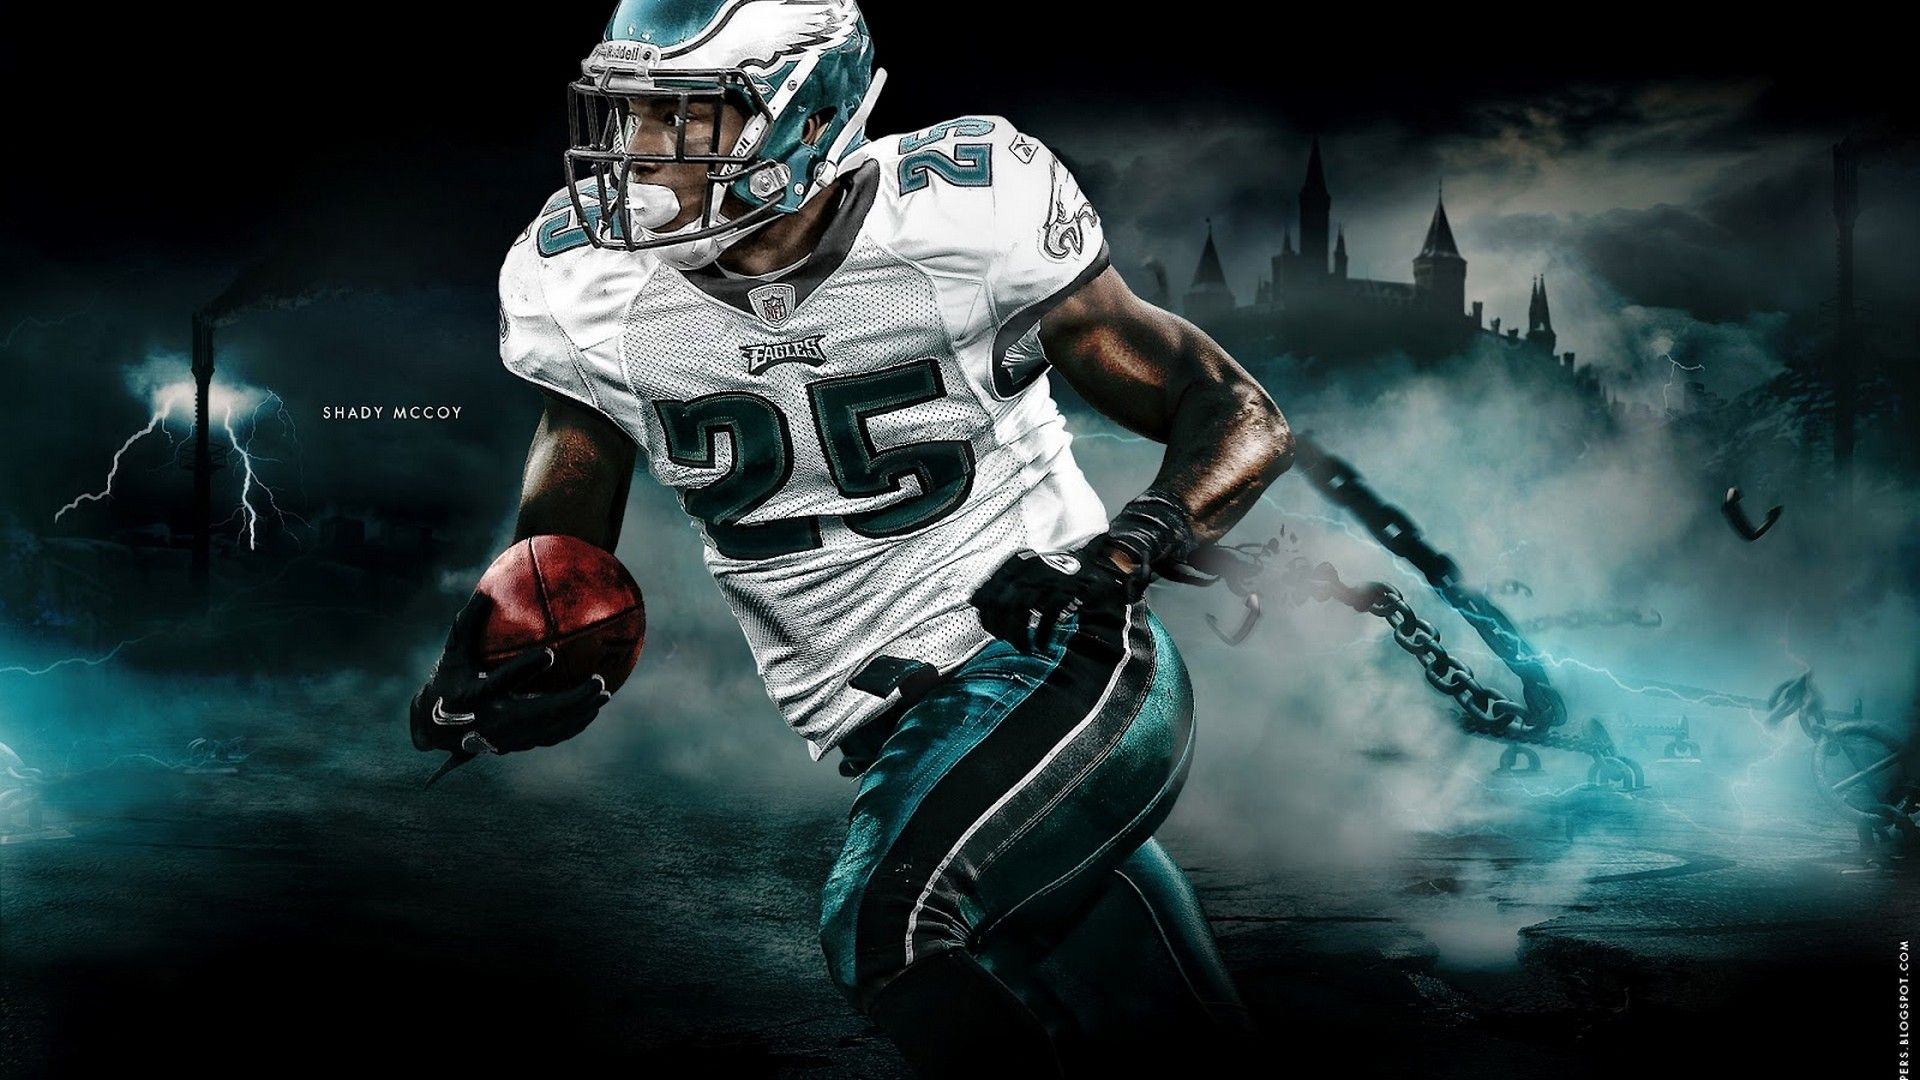 1920x1080 Wallpapers HD The Eagles 2022 NFL Football Wallpapers | Nfl football wallpaper, Philadelphia eagles wallpaper, Nfl